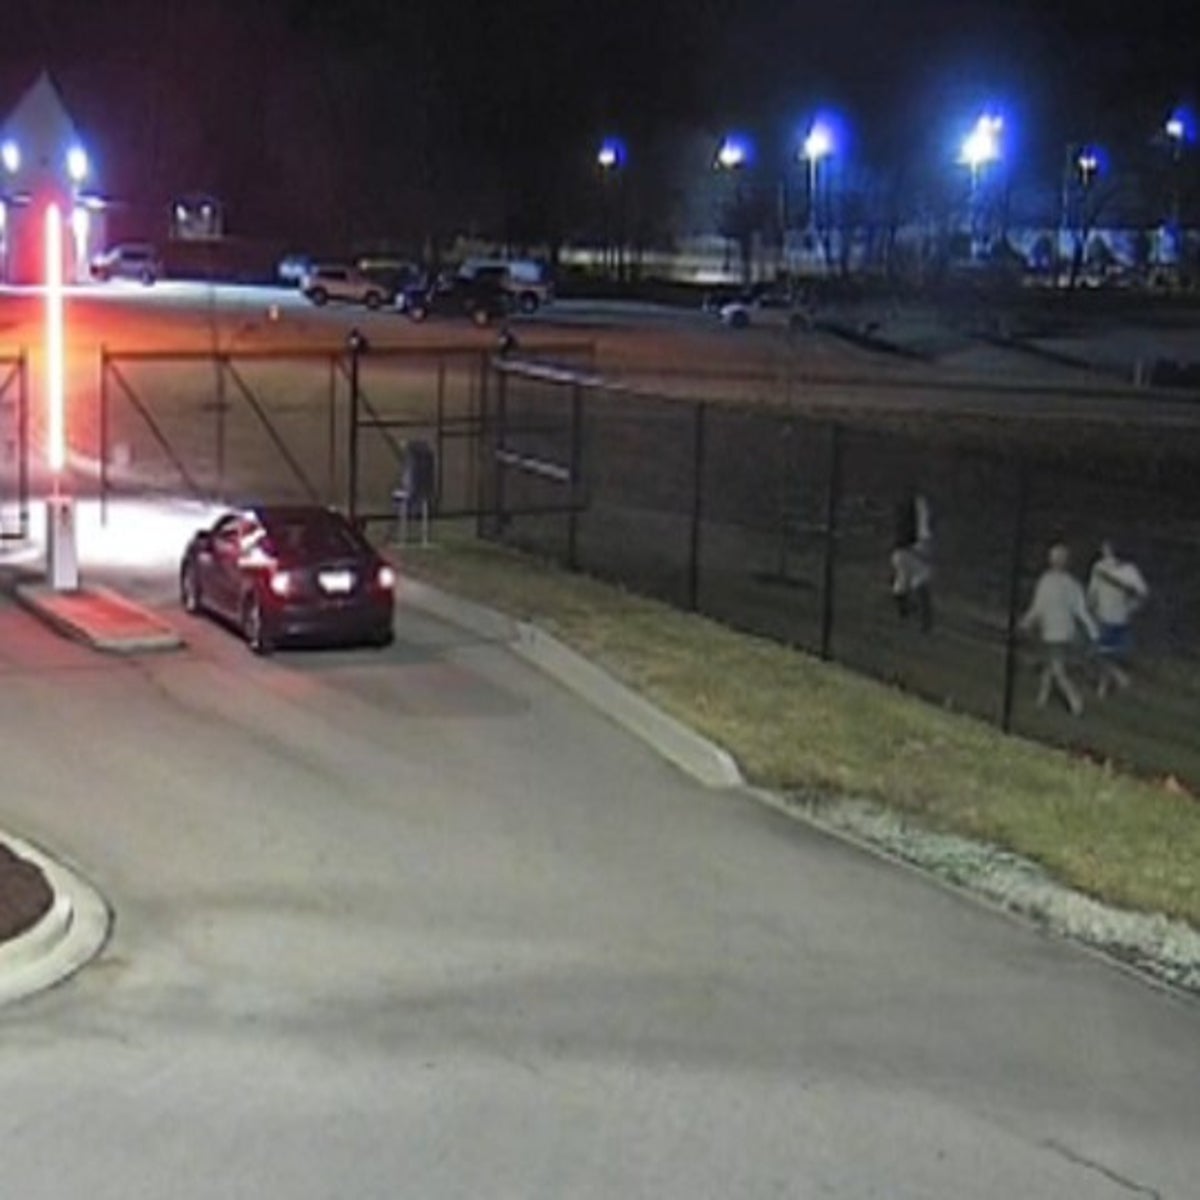 Five Missouri Inmates Seen Breaking Out Of Jail In Surveillance Video